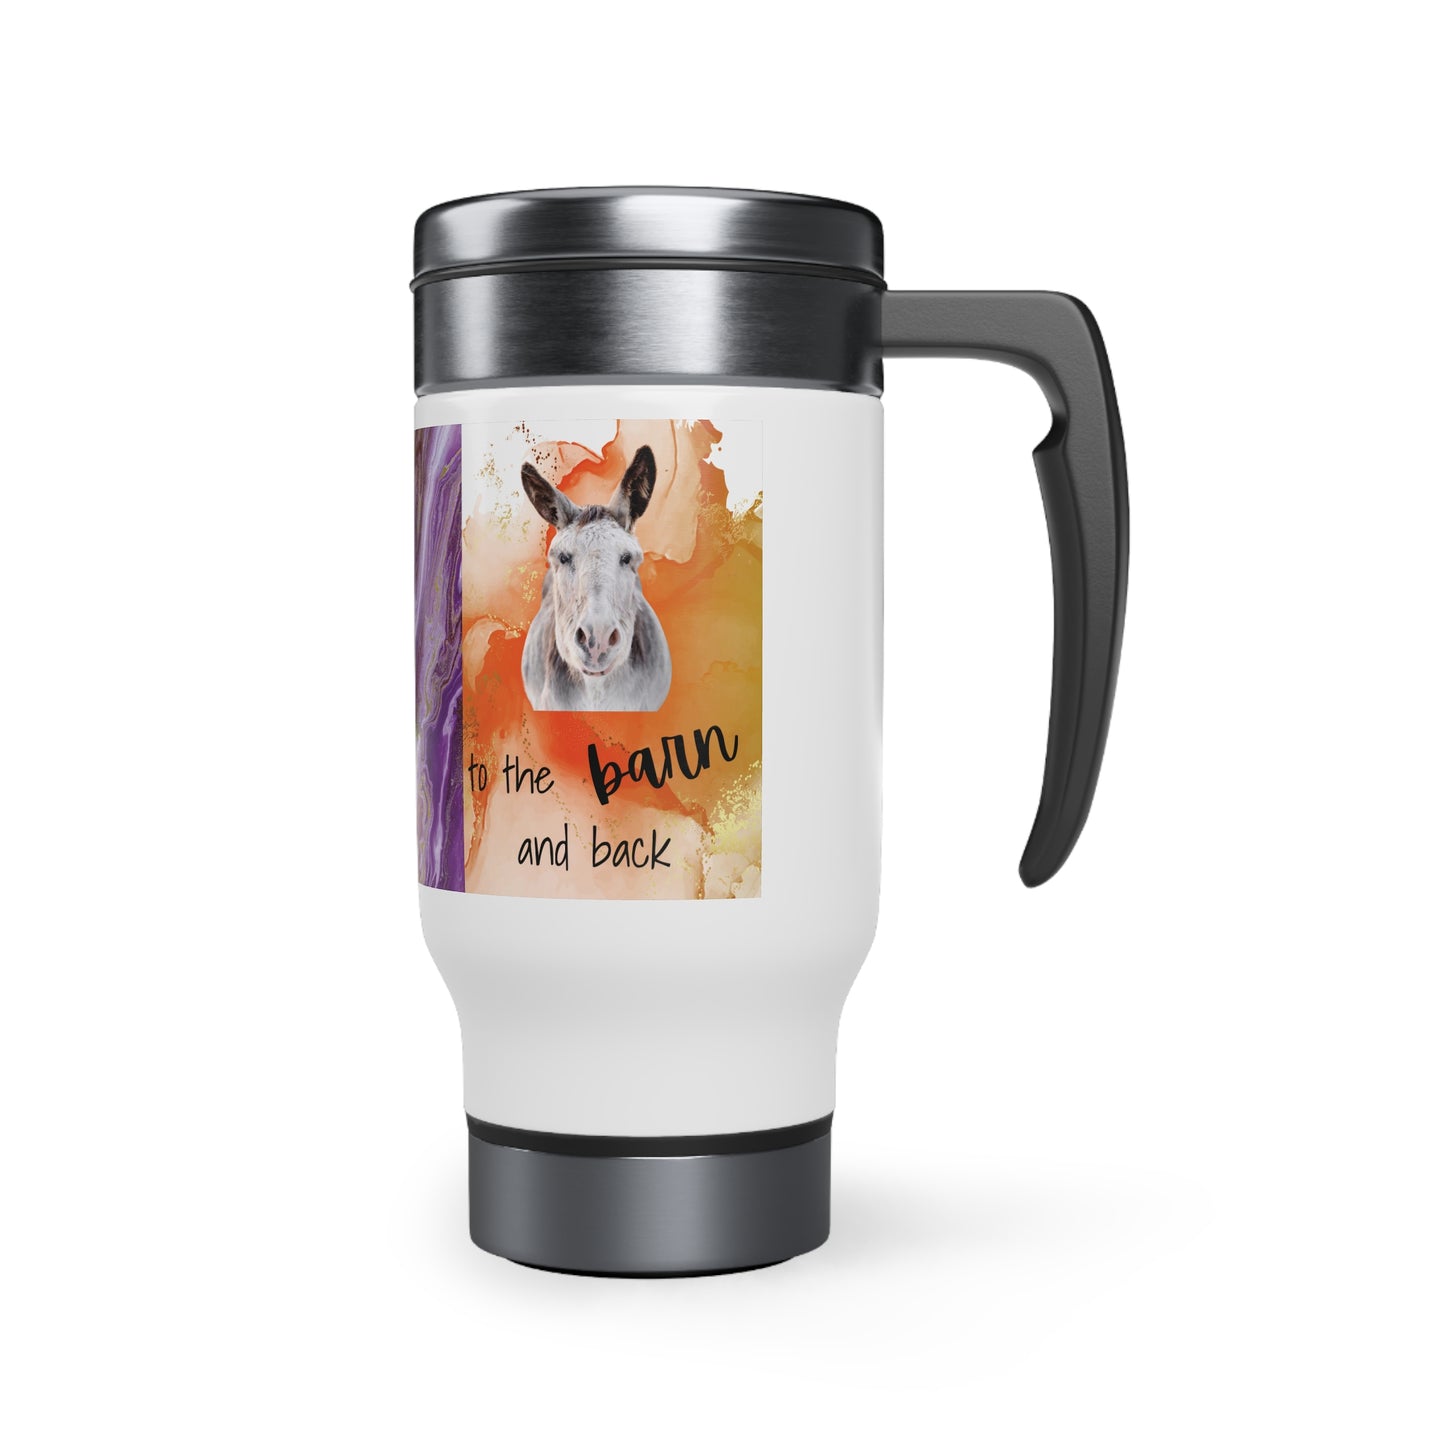 Love You to the Barn and Back    Stainless Steel Travel Mug with Handle, 14oz